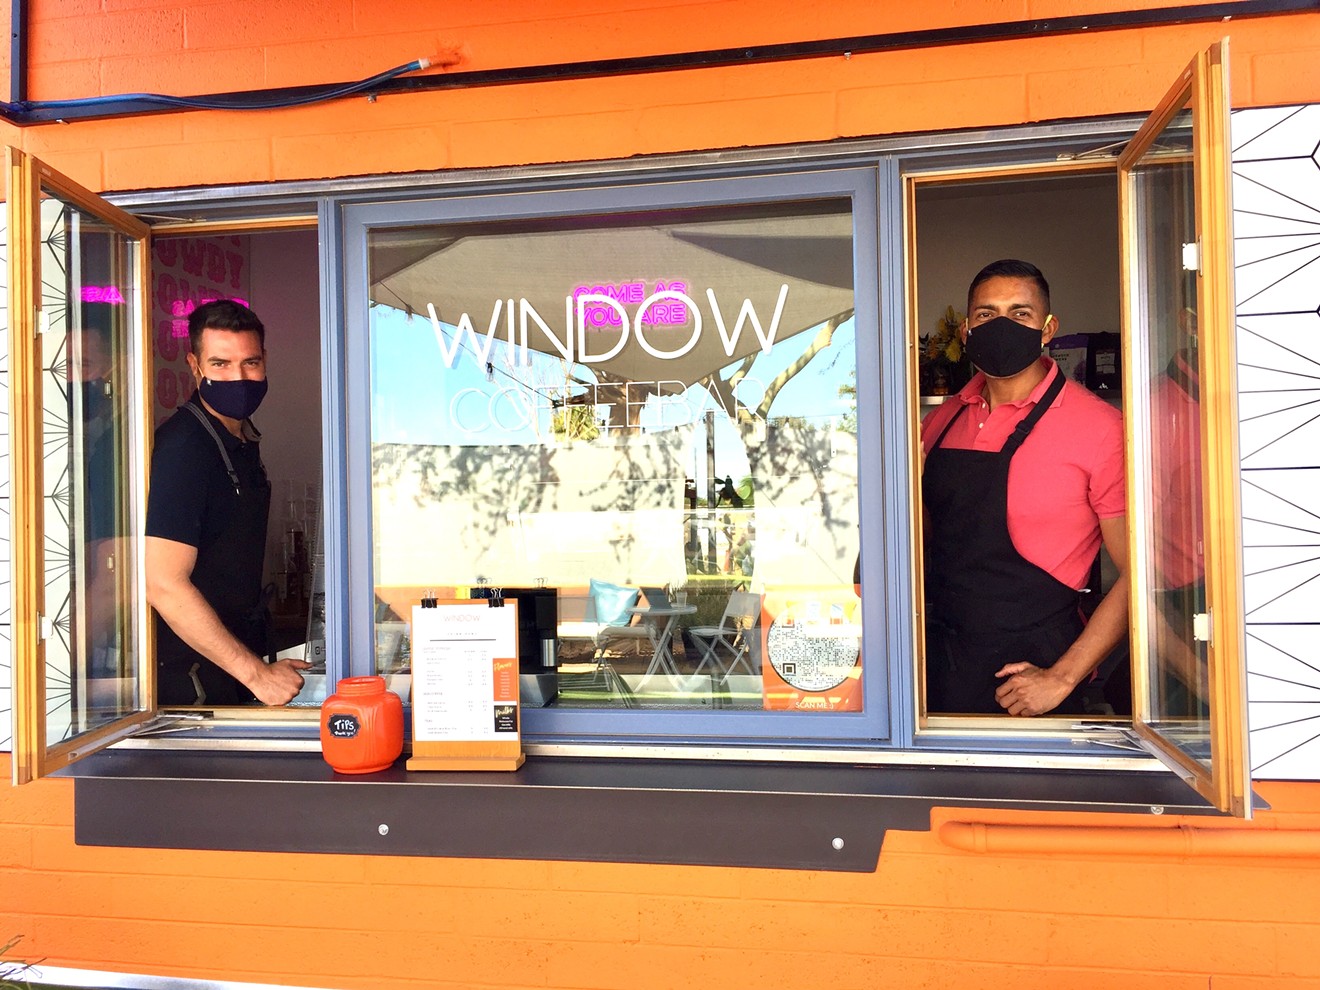 Co-owners Marcus Sanchez and Homero Medrano bring big personality to Window Coffee Bar.